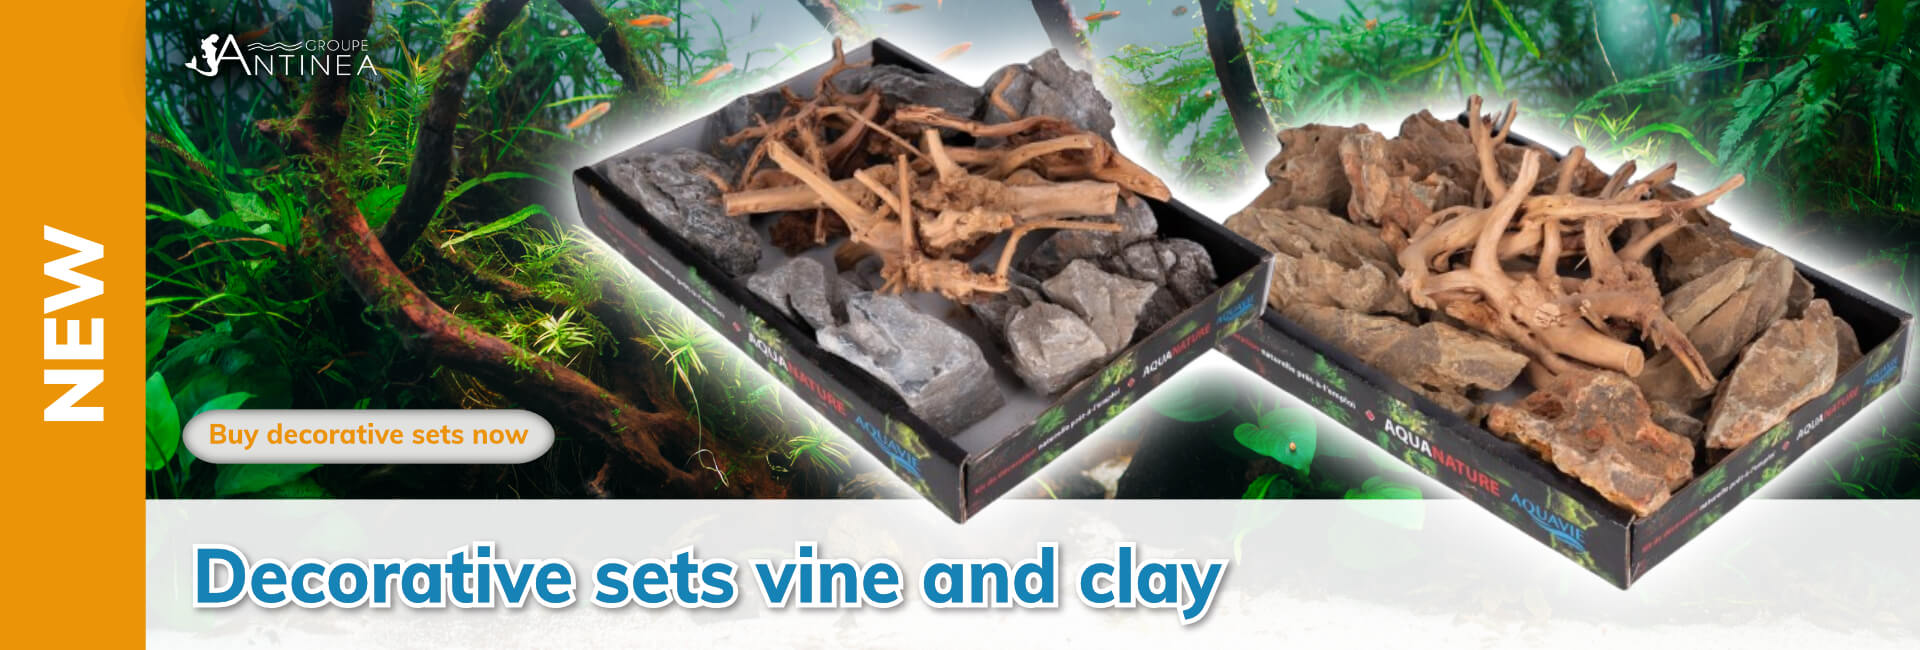 Group Antinea Decorative sets vine and clay